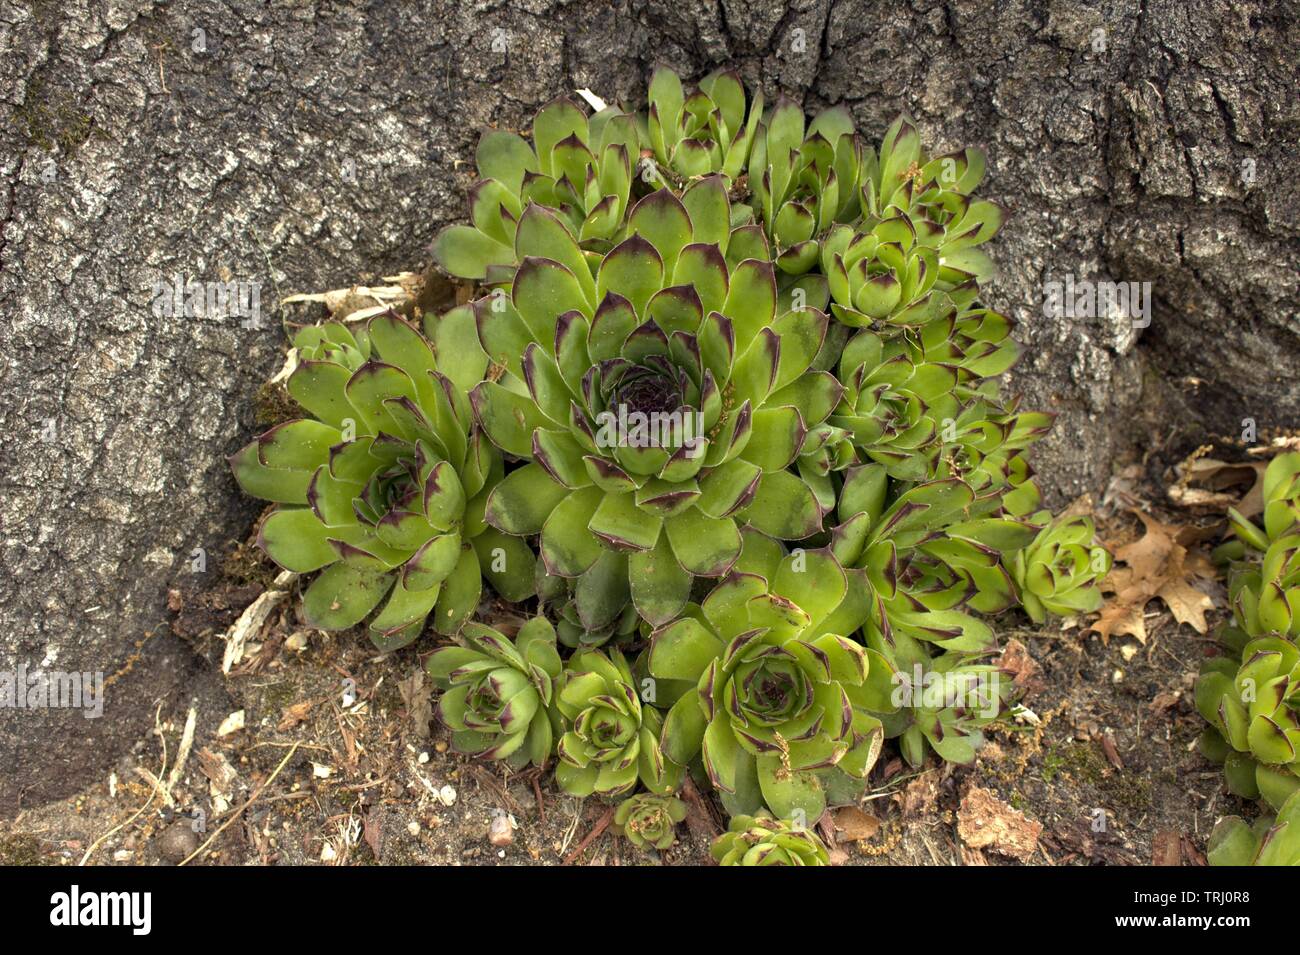 Hens And Chicks Growing Aside A Tree Trunk Stock Photo